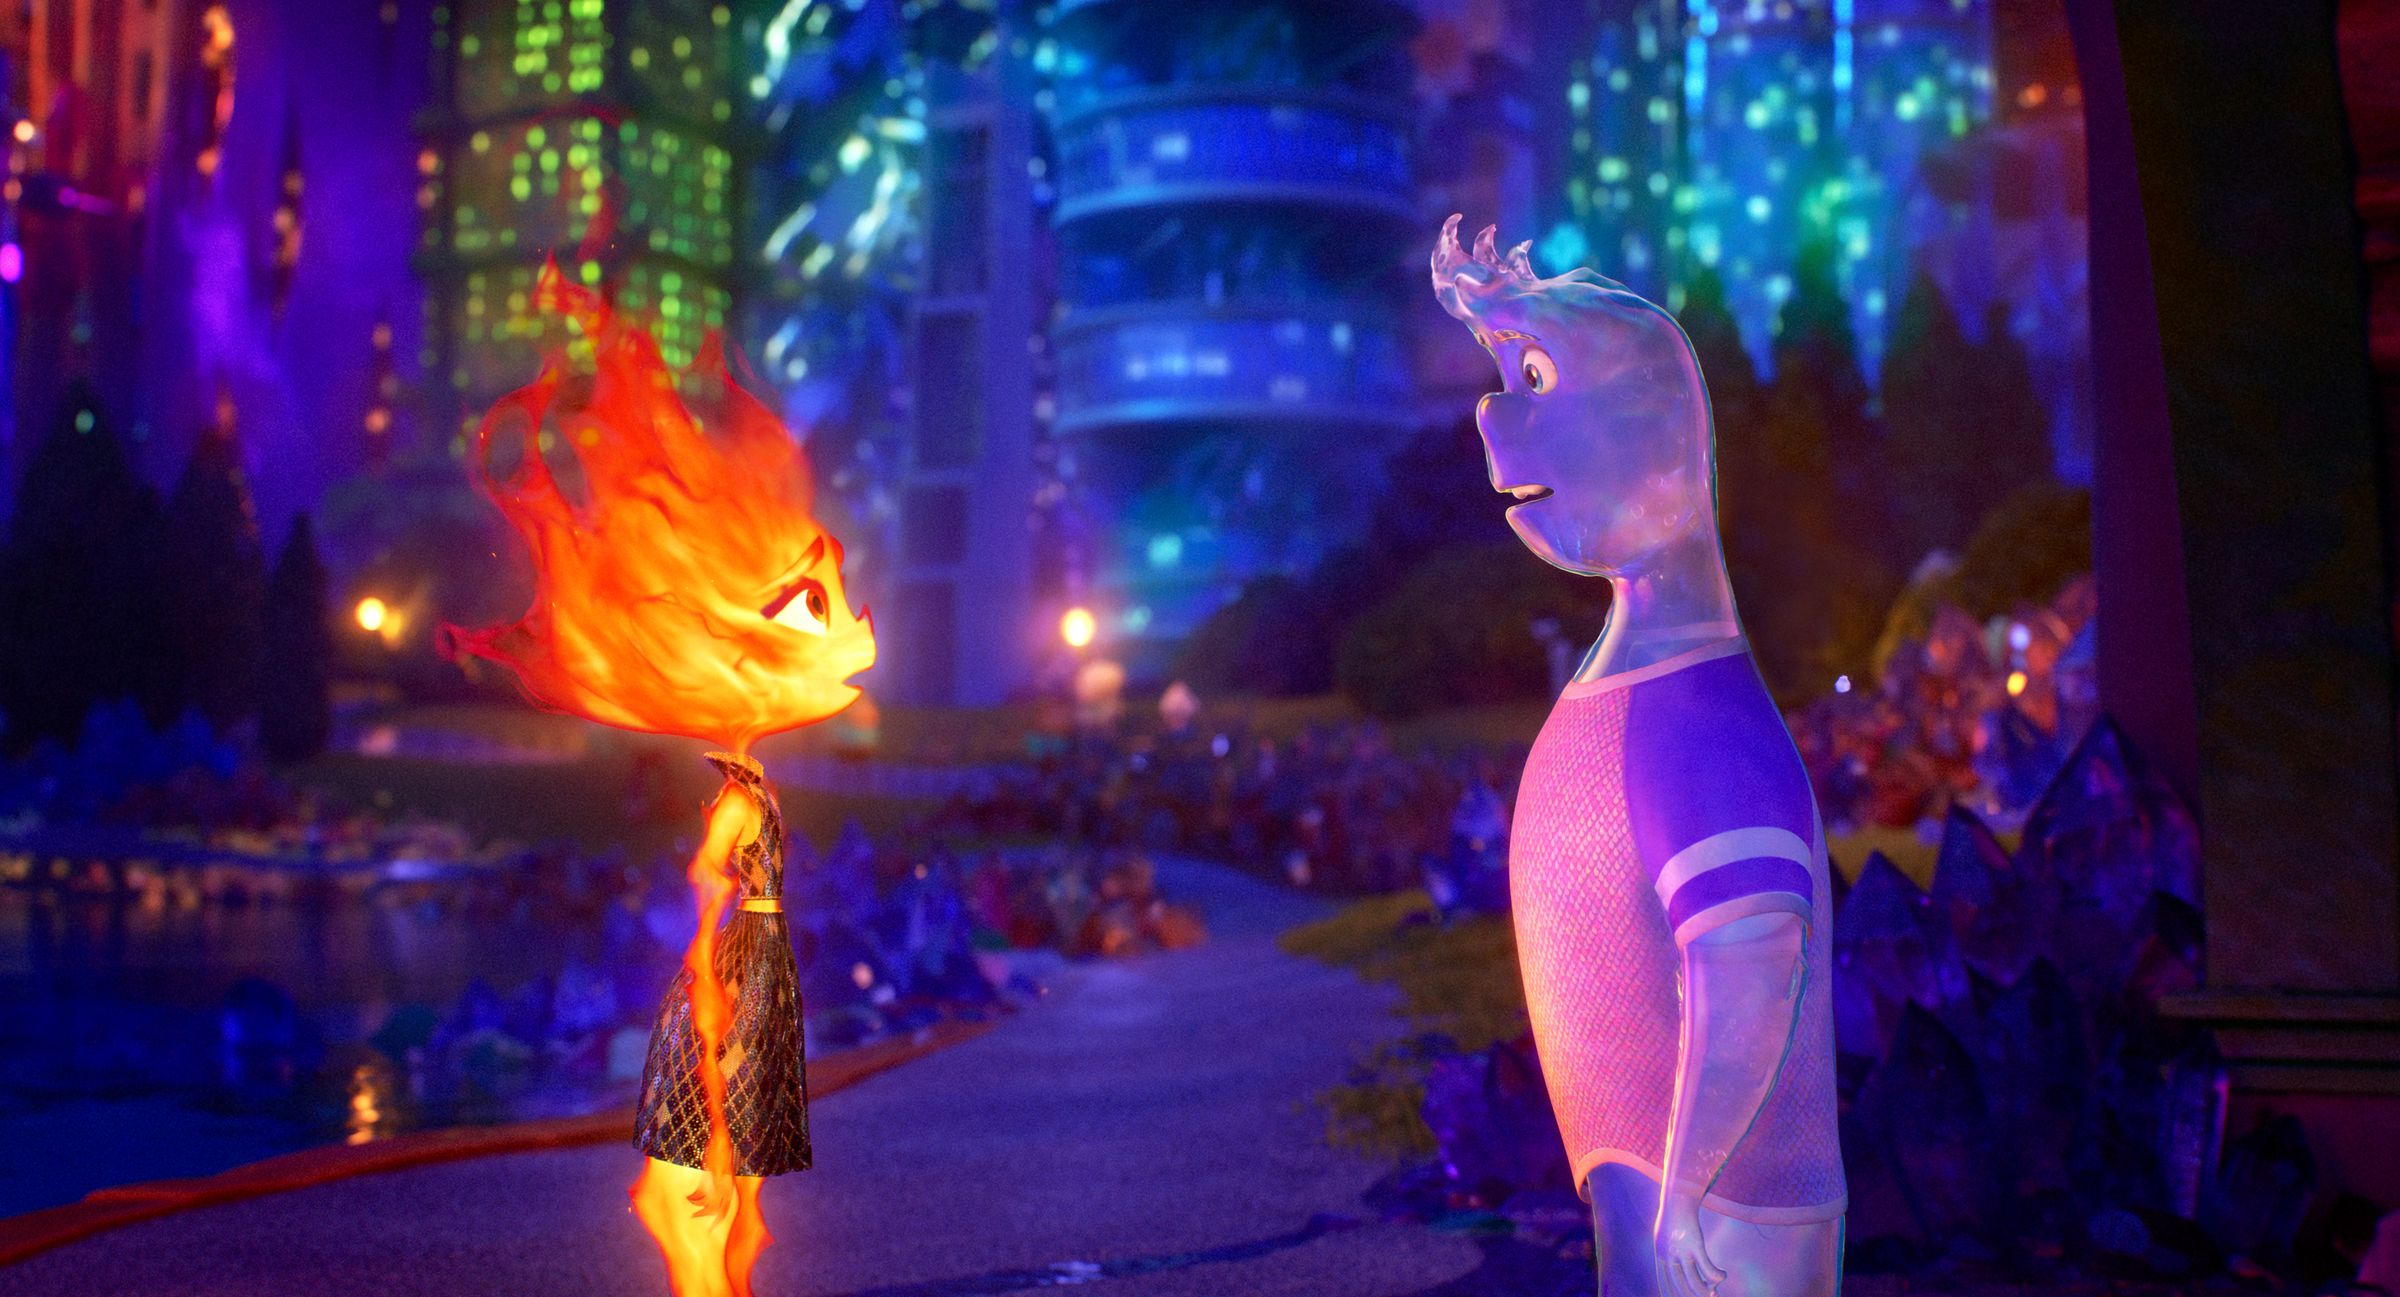 A still image from the animated film Elemental.